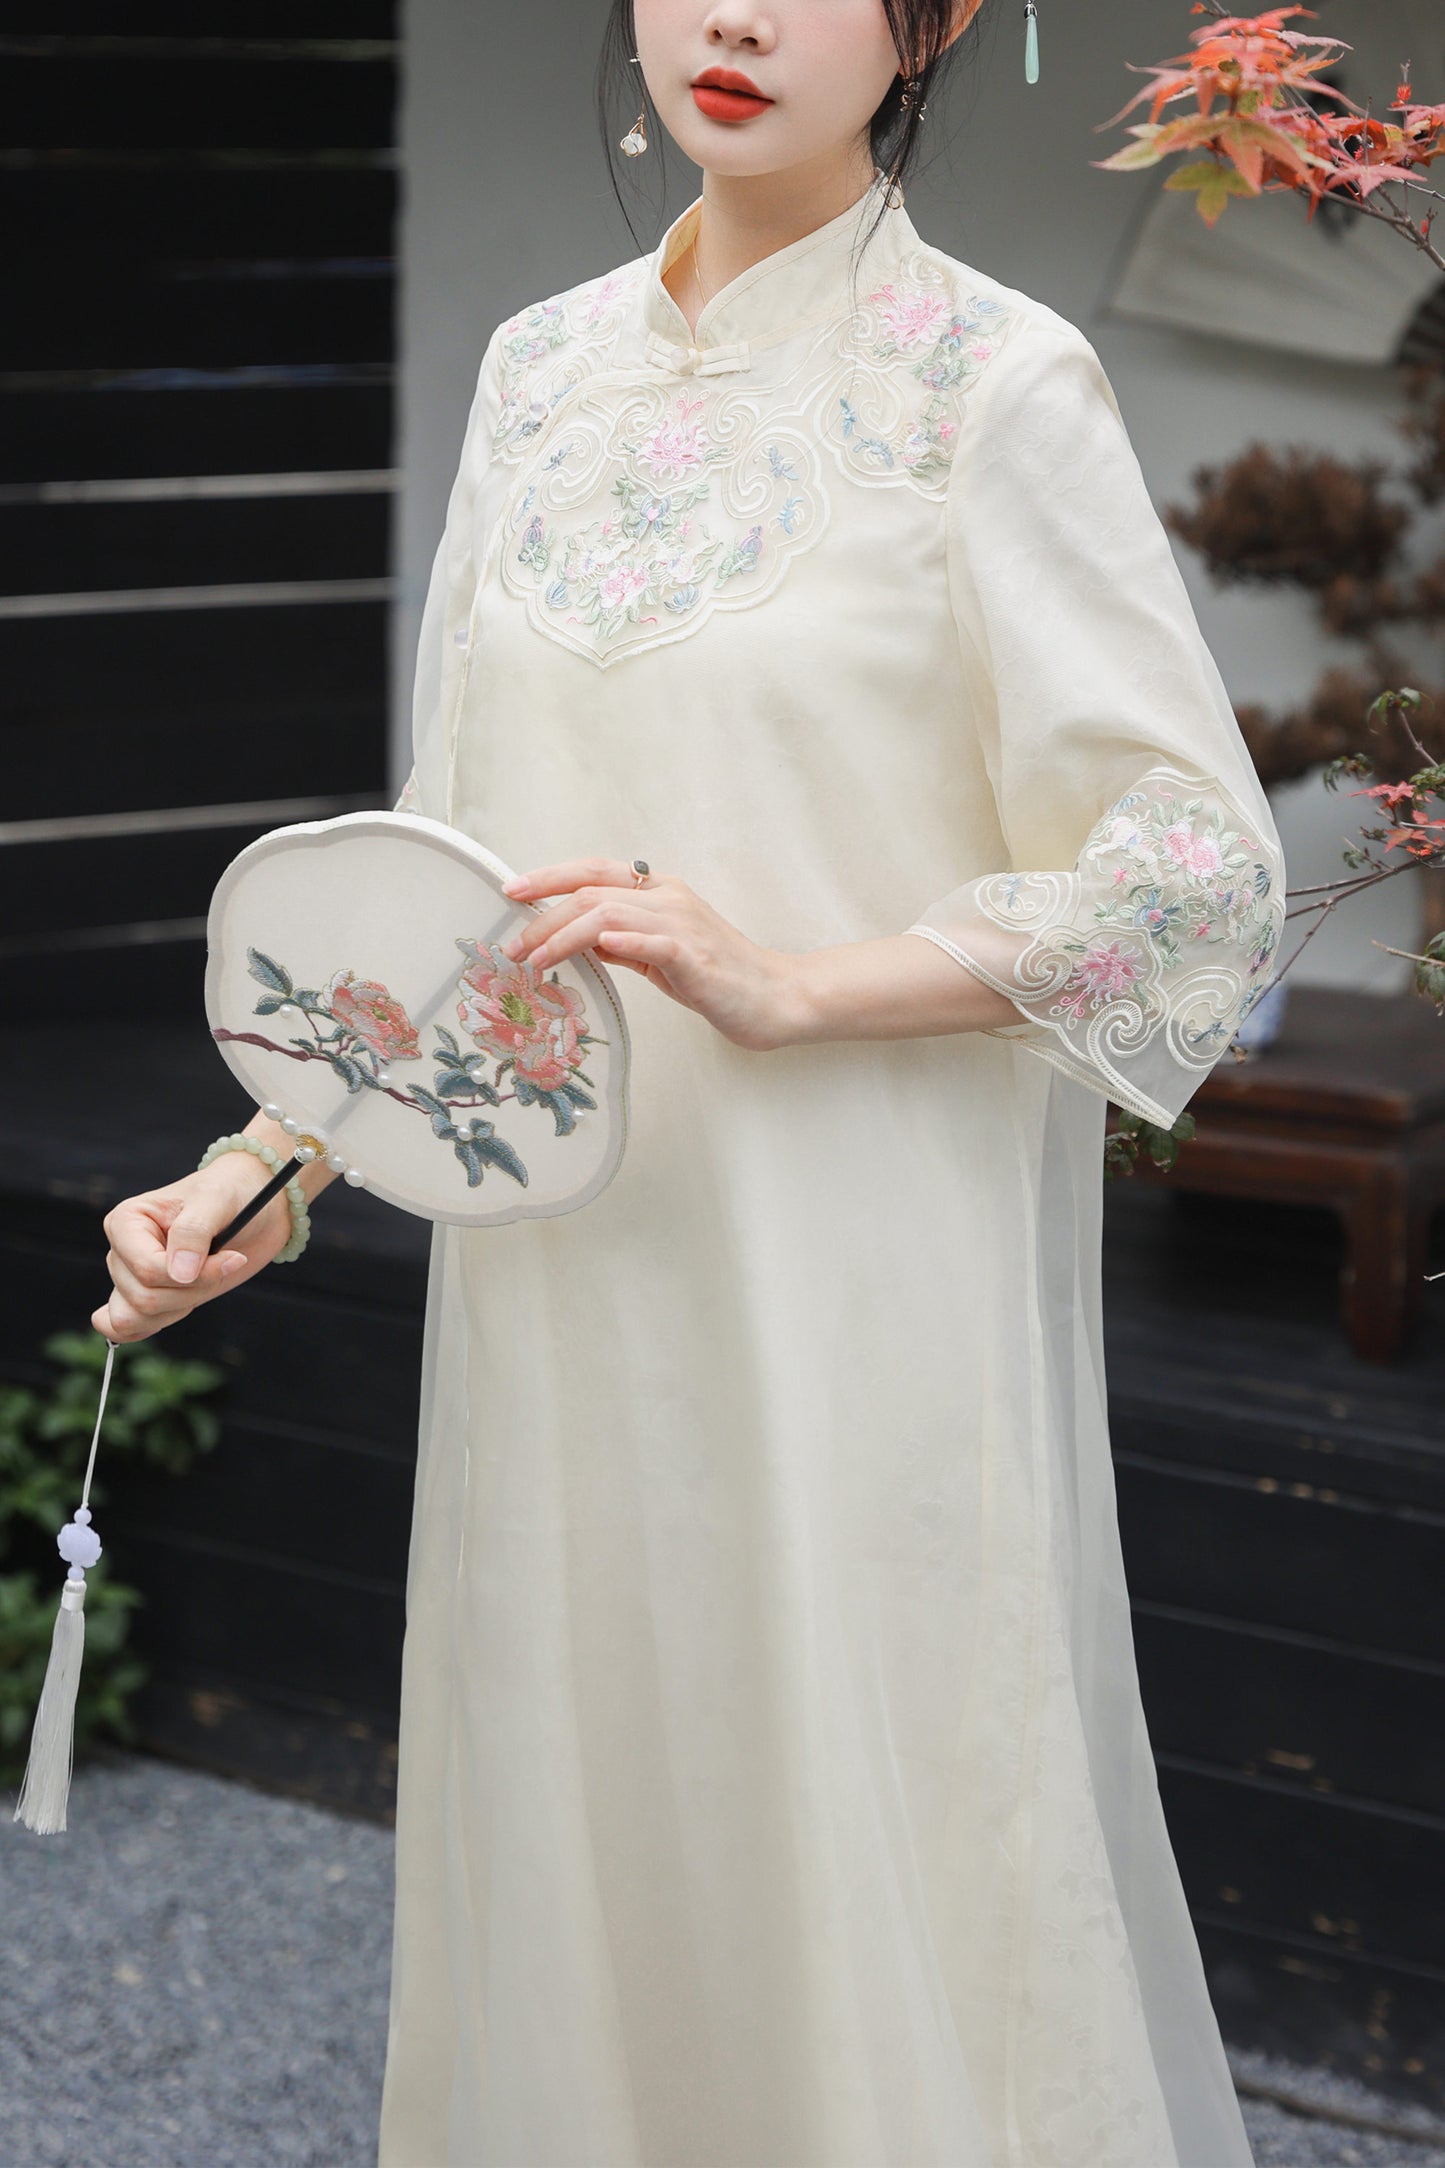 Women's White Embroidered Floral Midi Dress